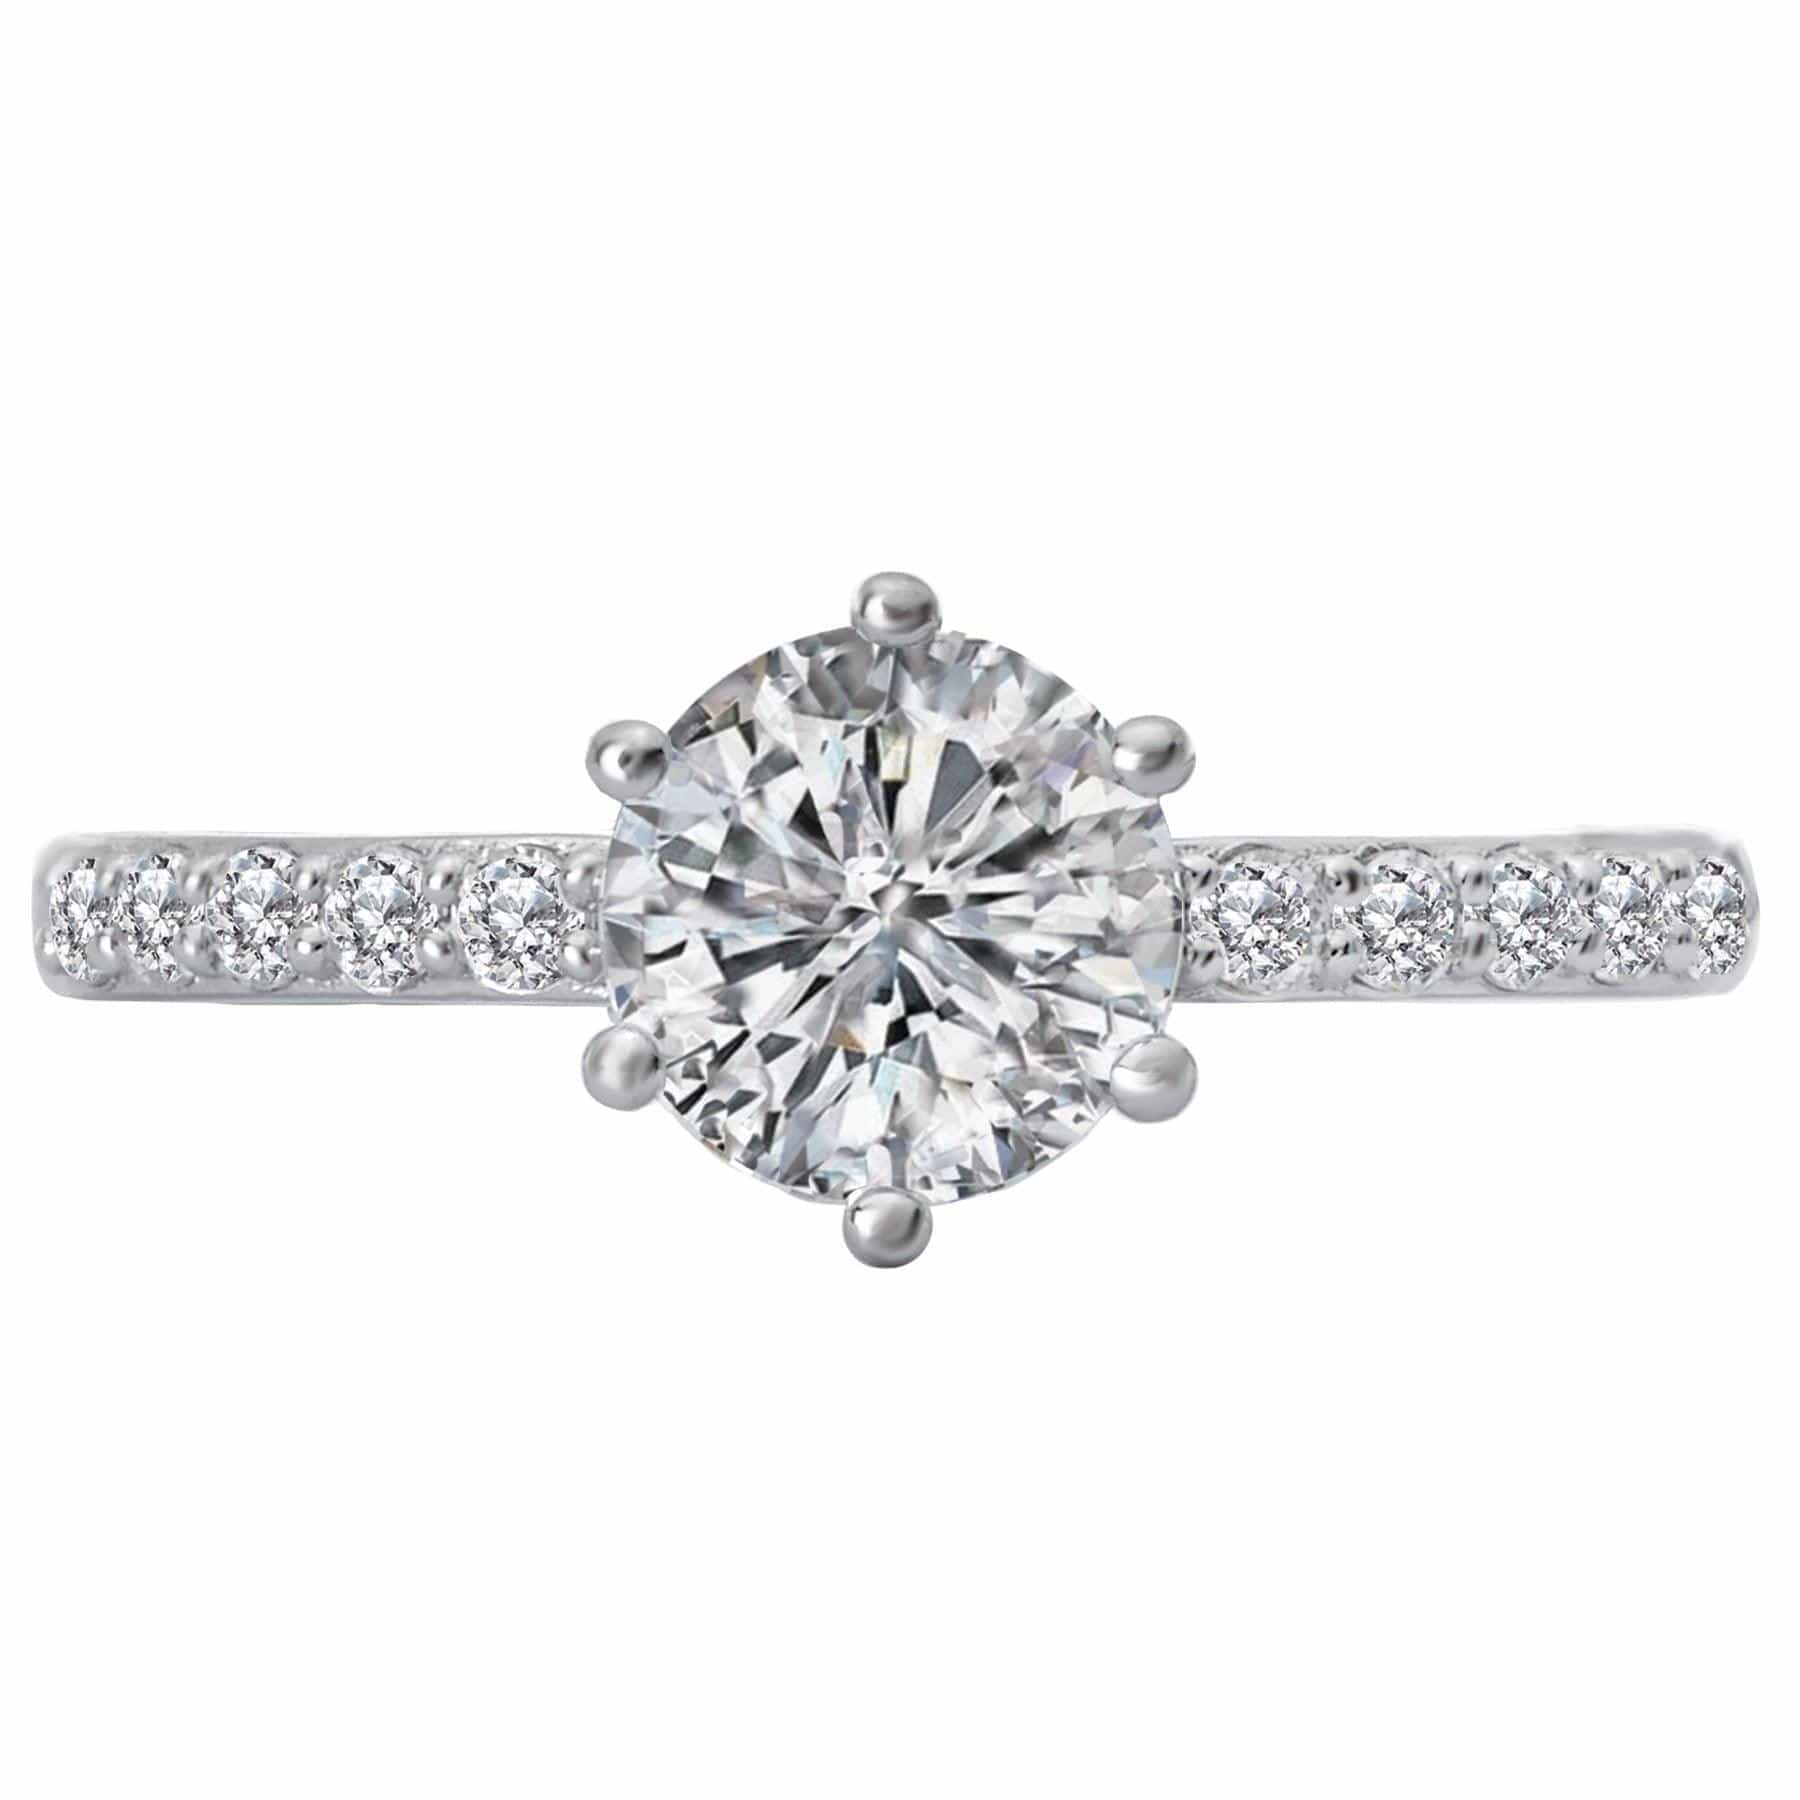 BW JAMES Engagement Rings "The Vienna" The Classic Semi-Mount Diamond Ring